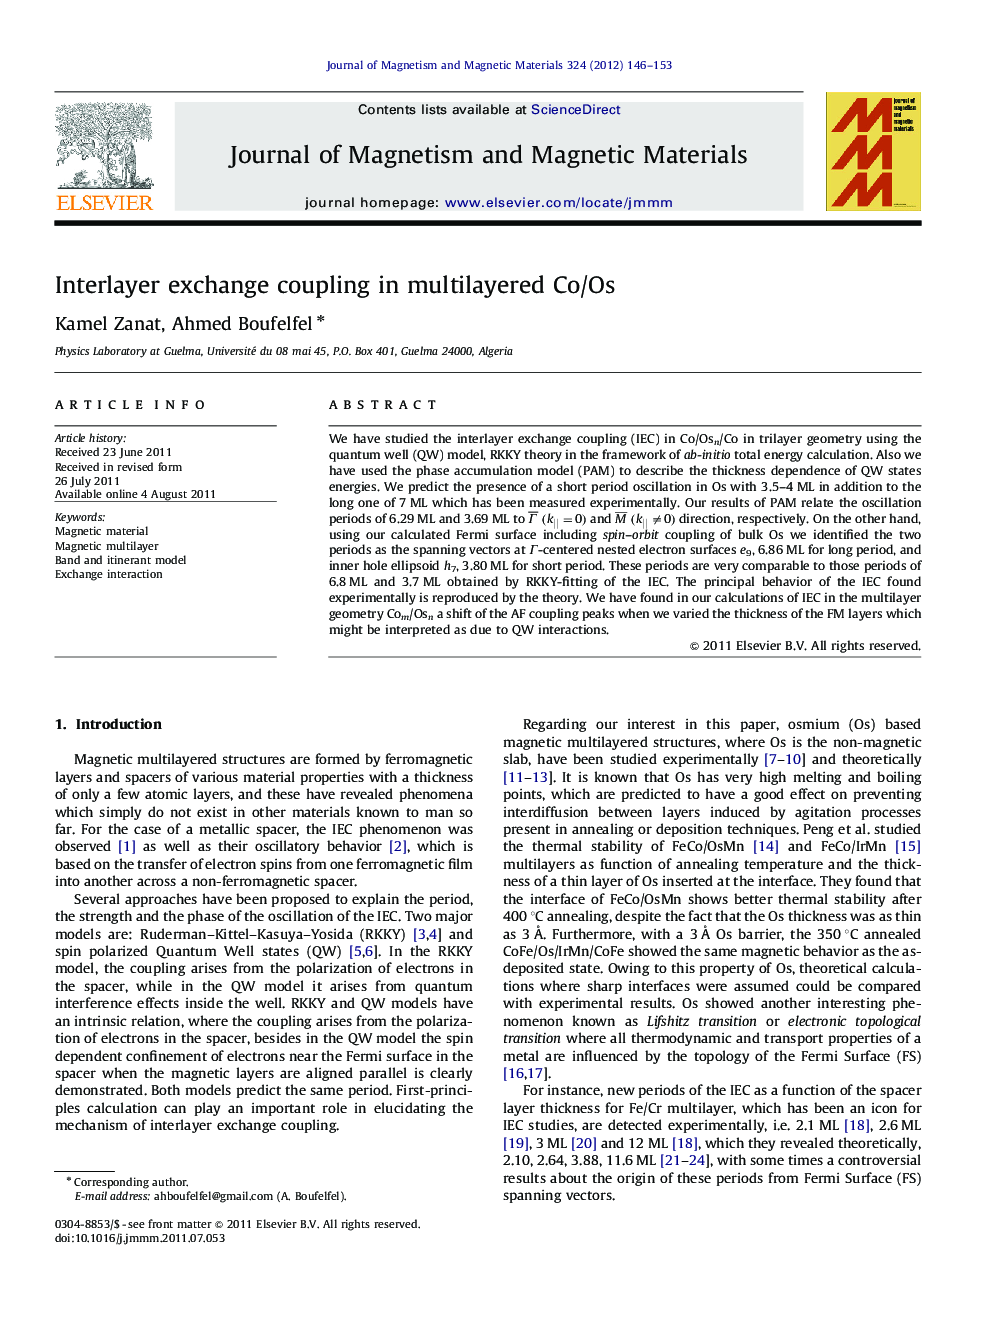 Interlayer exchange coupling in multilayered Co/Os